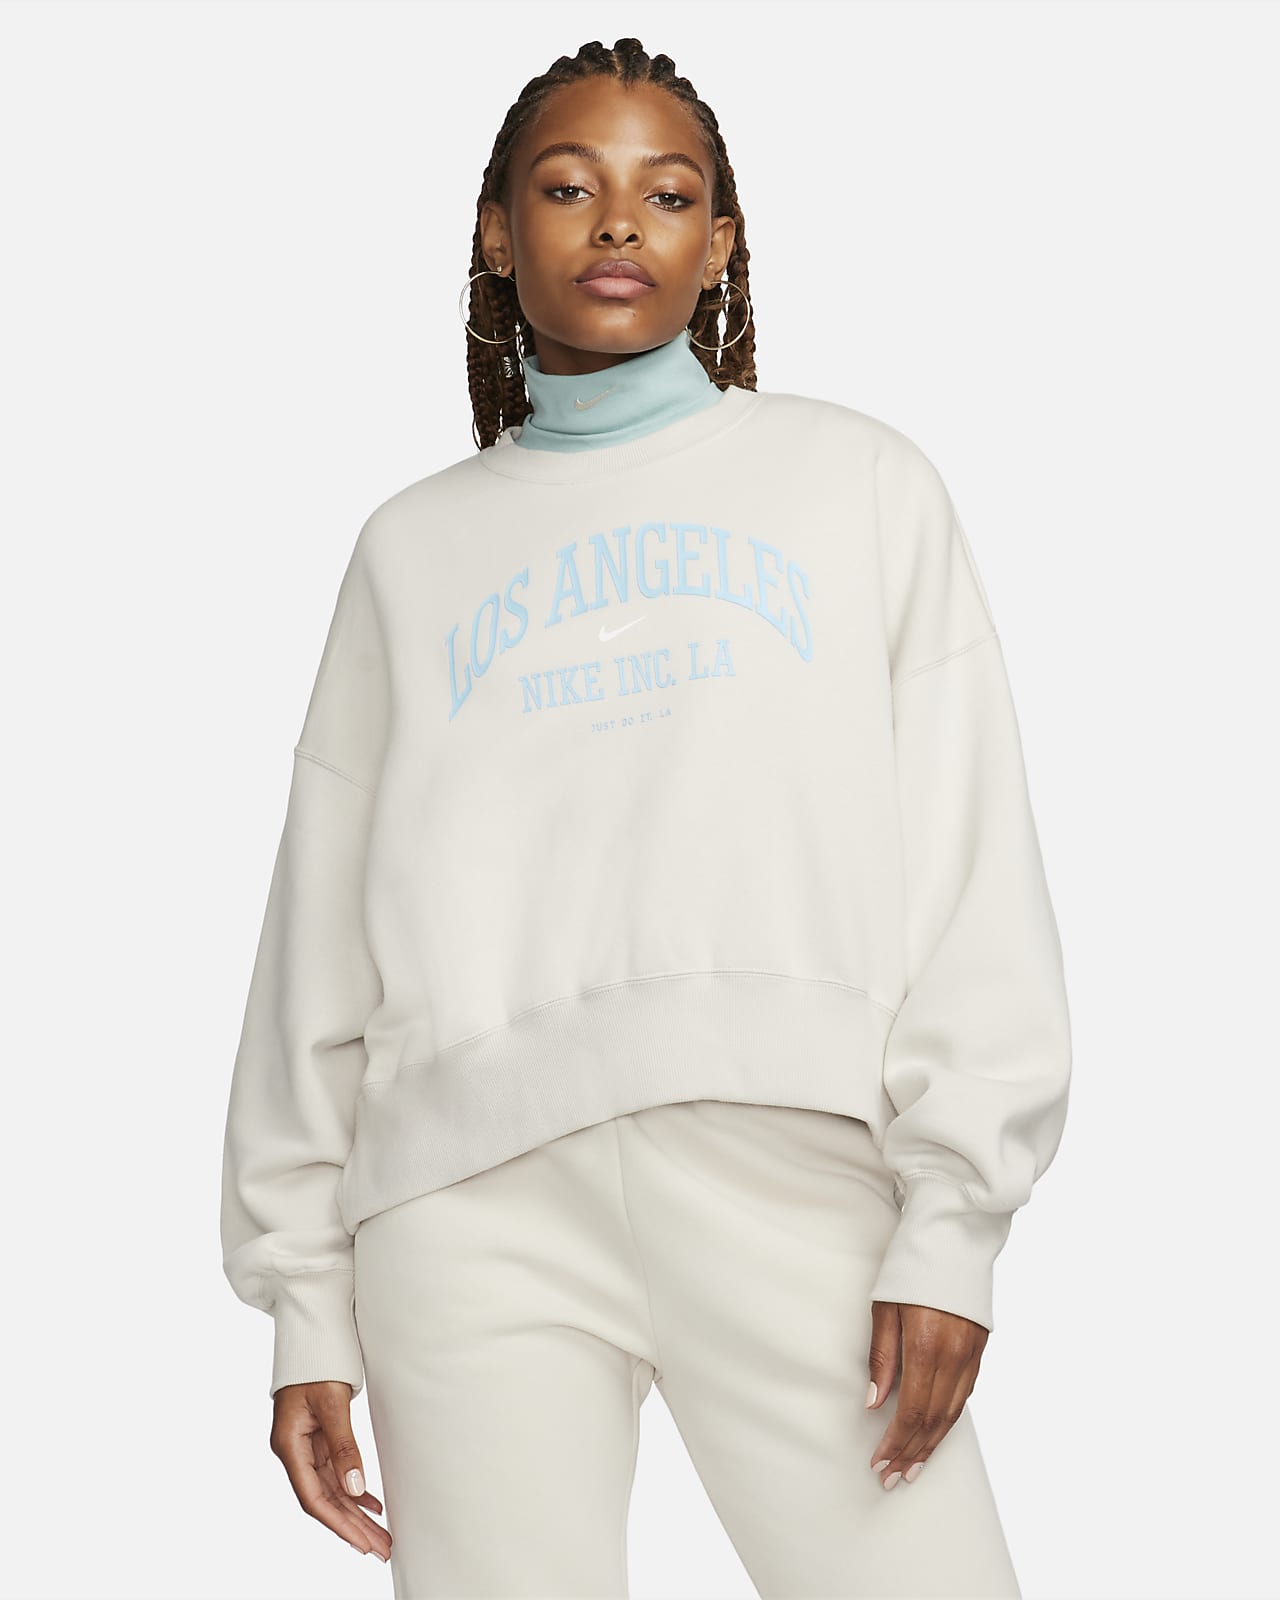 https://static.nike.com/a/images/t_PDP_1280_v1/f_auto,q_auto:eco/1a08c63b-ed2b-463d-875a-733143c1e60a/sportswear-phoenix-fleece-womens-over-oversized-crew-neck-graphic-sweatshirt-bbThB8.png